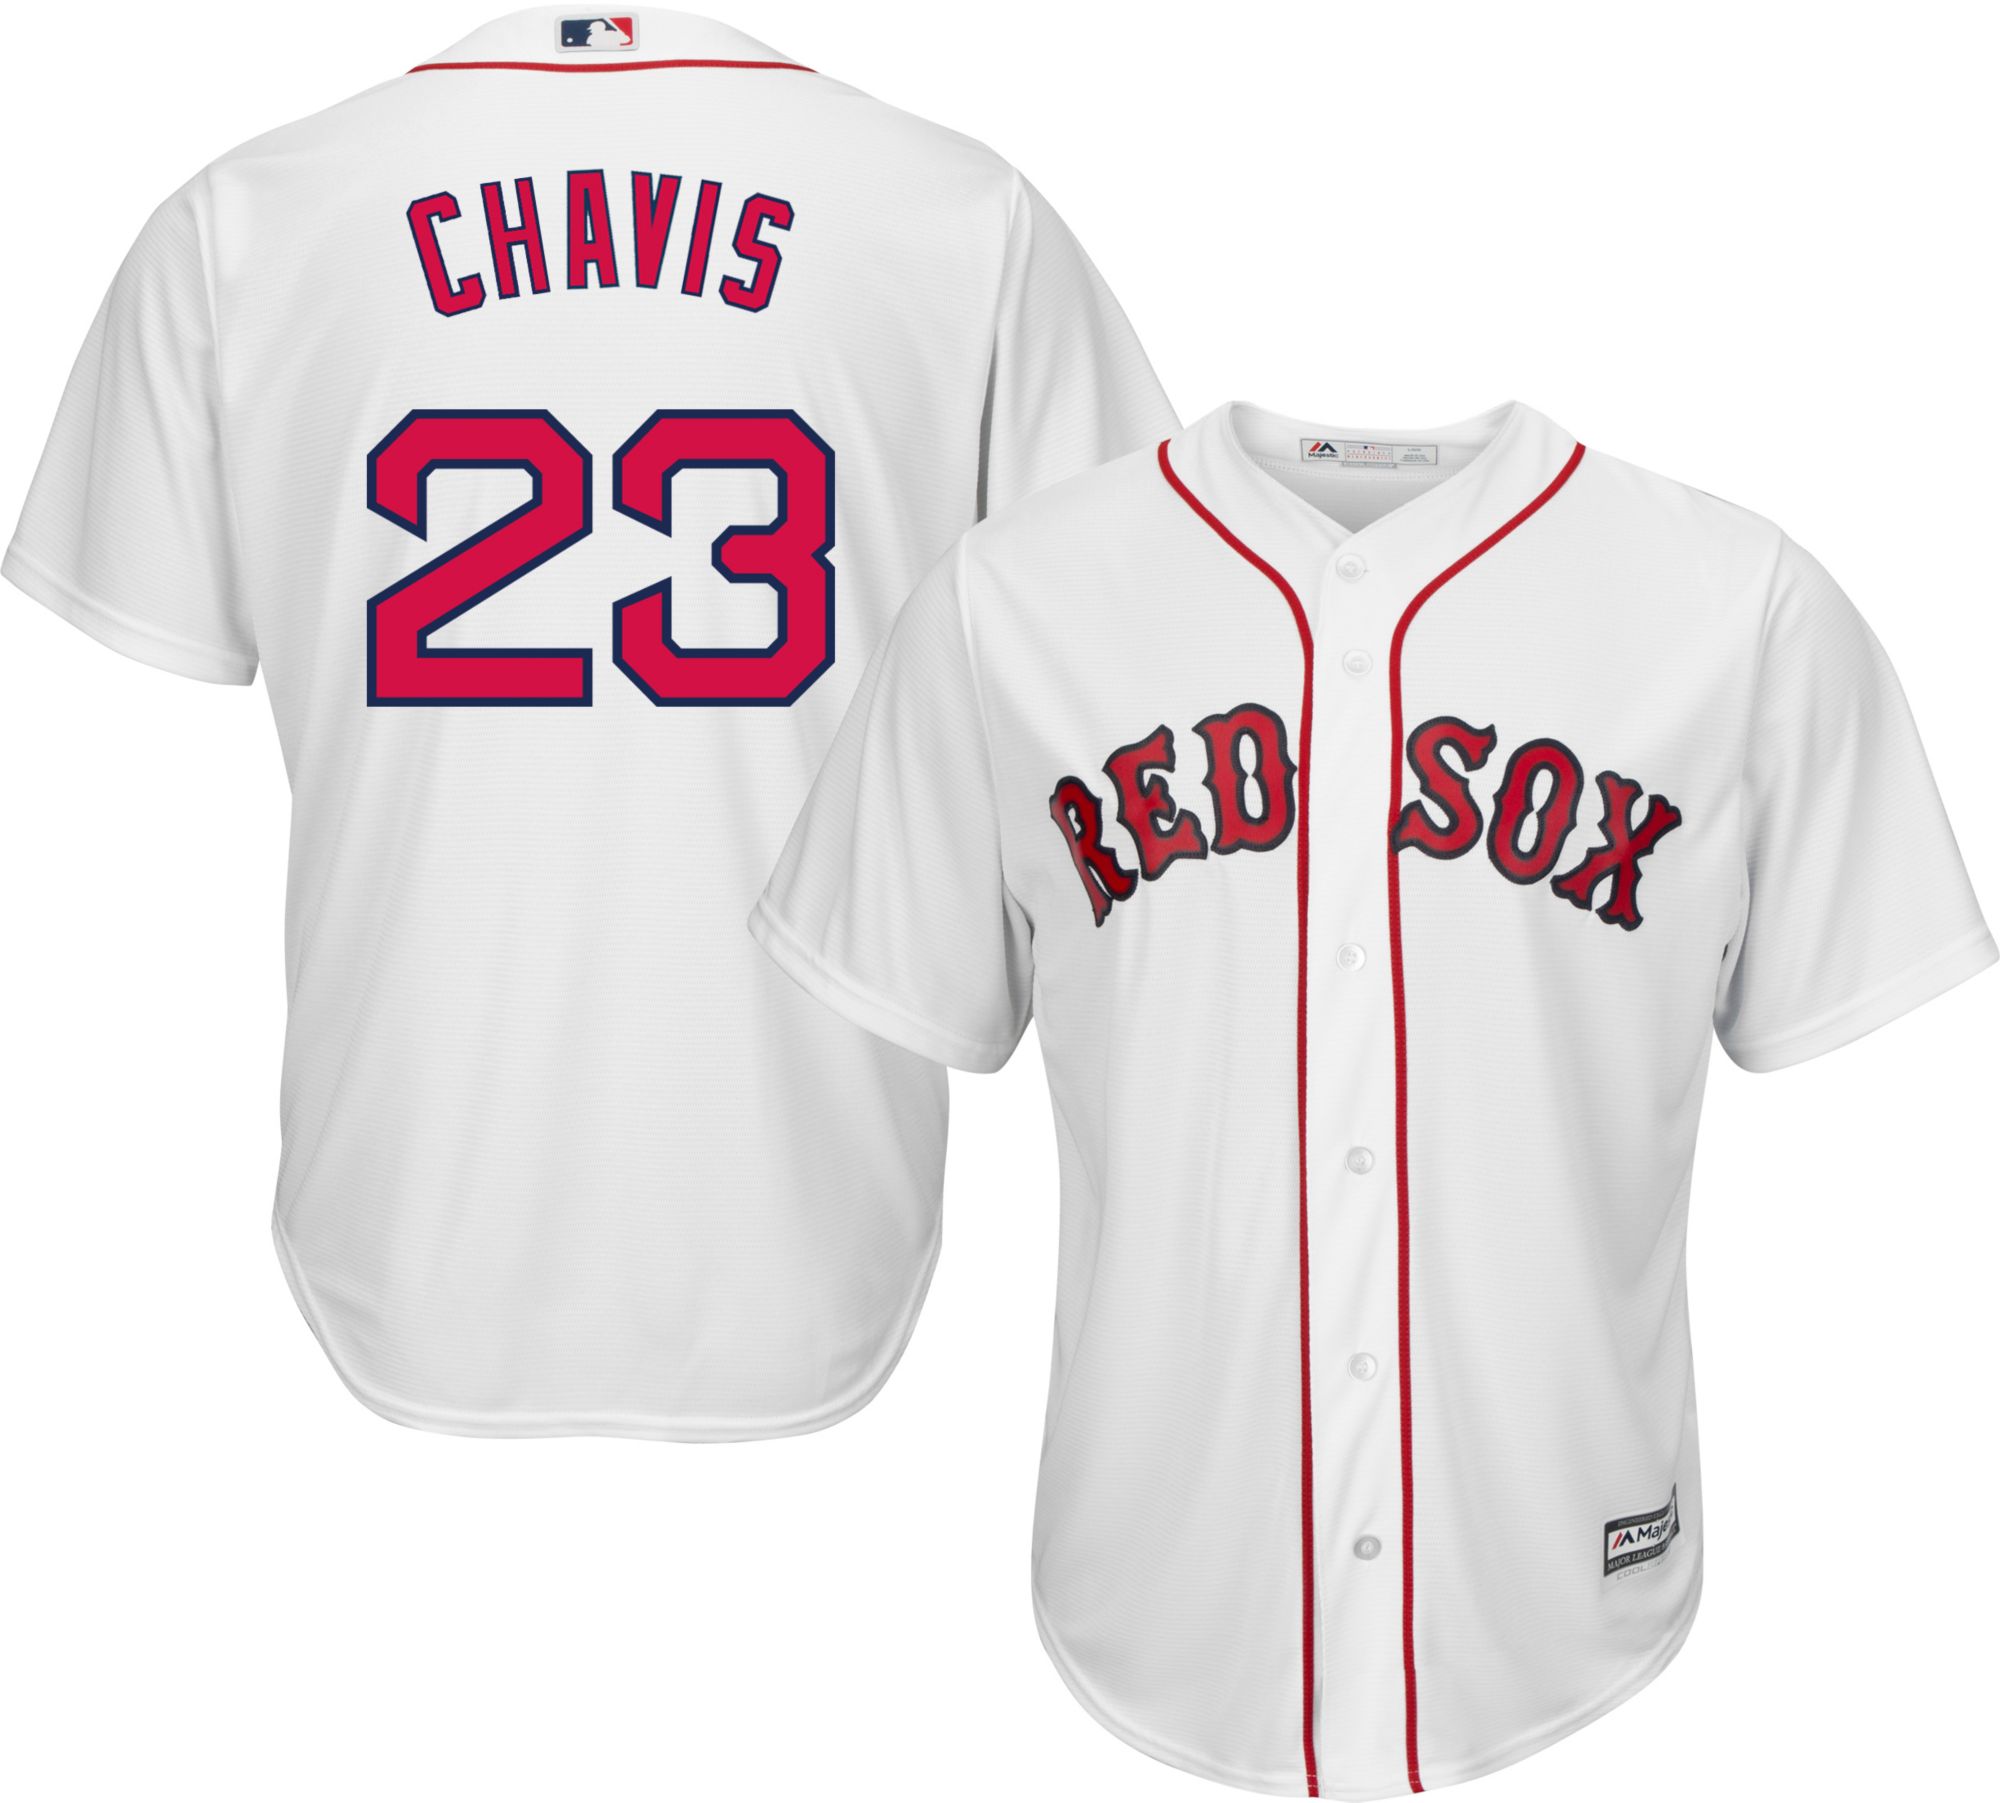 price red sox jersey